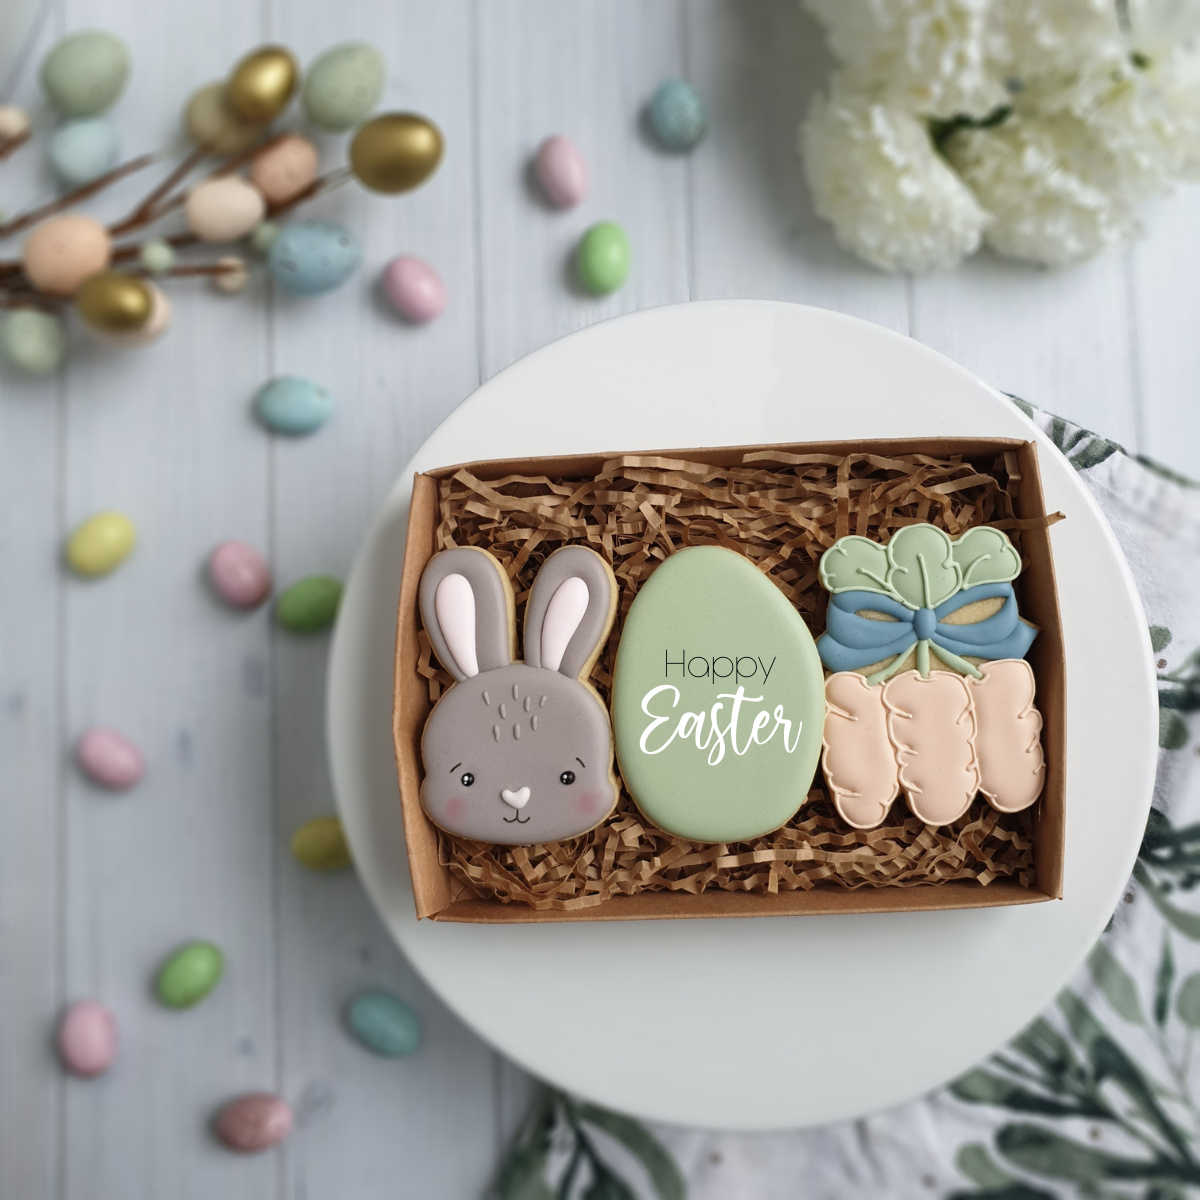 3 Piece Happy Easter Gift Box 2021 - Cookies by Qui Geelong.png